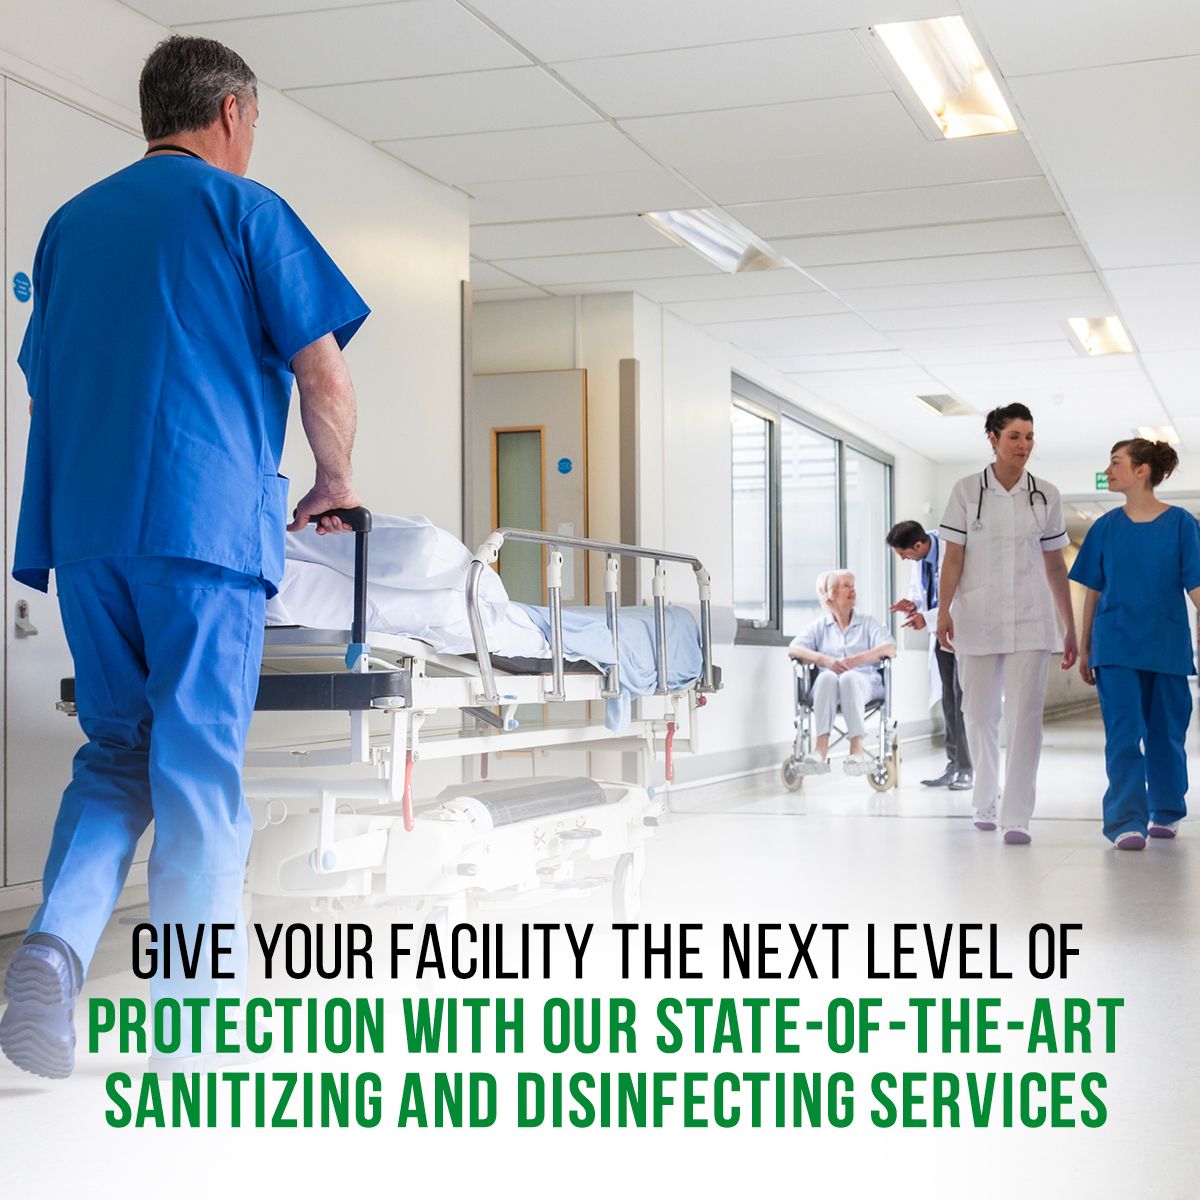 Give Your Facility the Next Level of Protection With Our State-Of-The-Art Sanitizing and Disinfecting Services